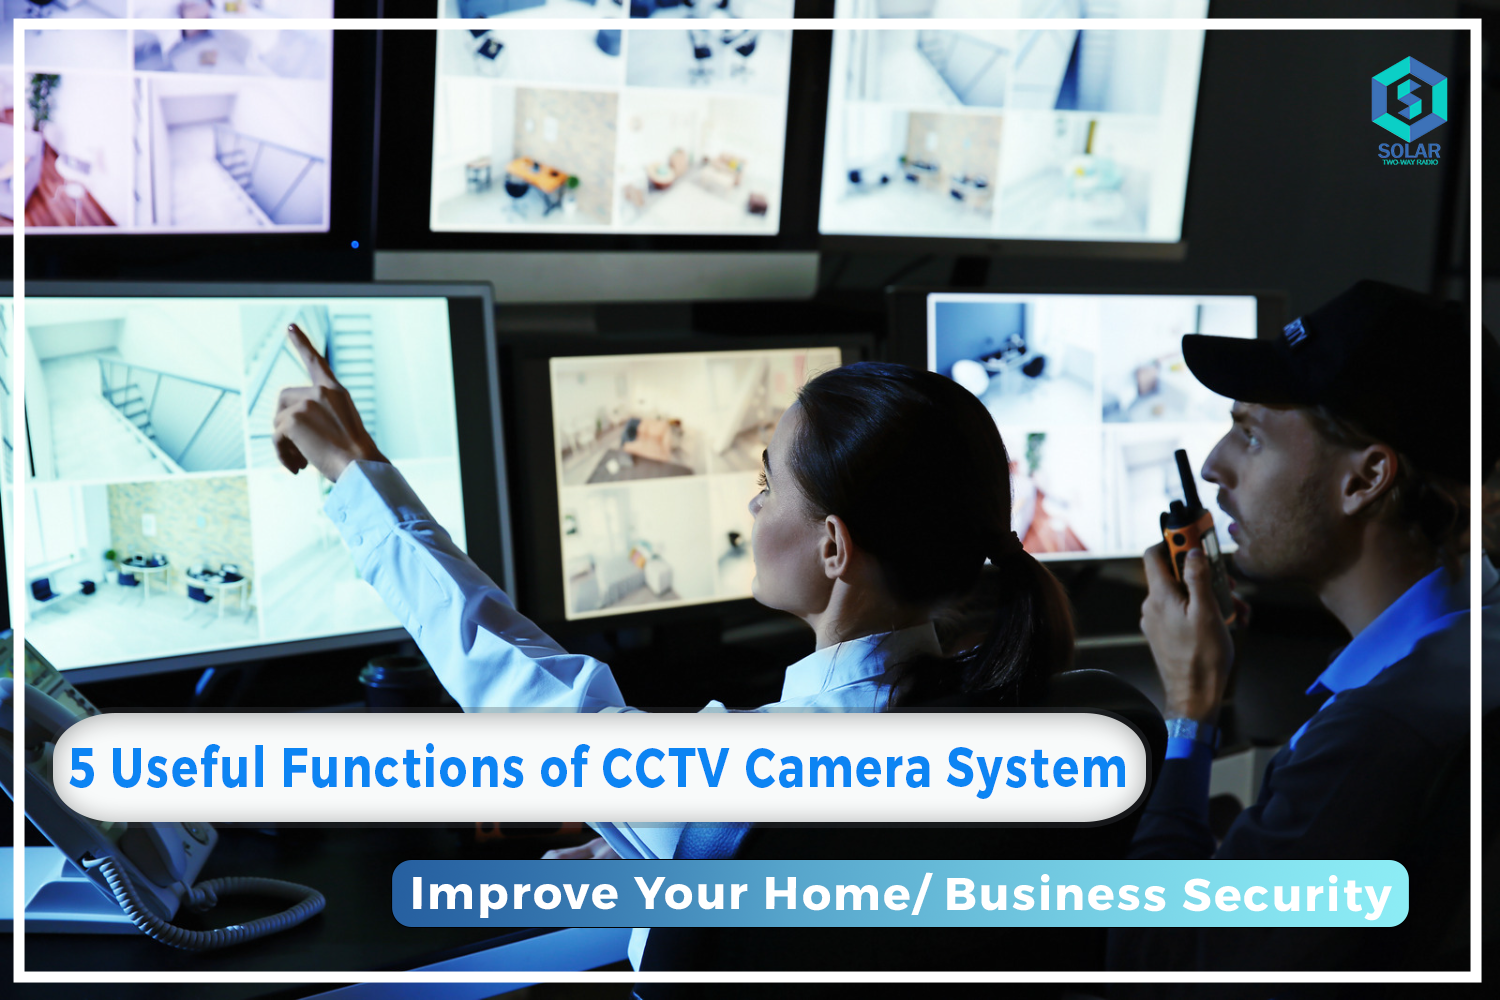 5 Useful Functions of CCTV Camera System